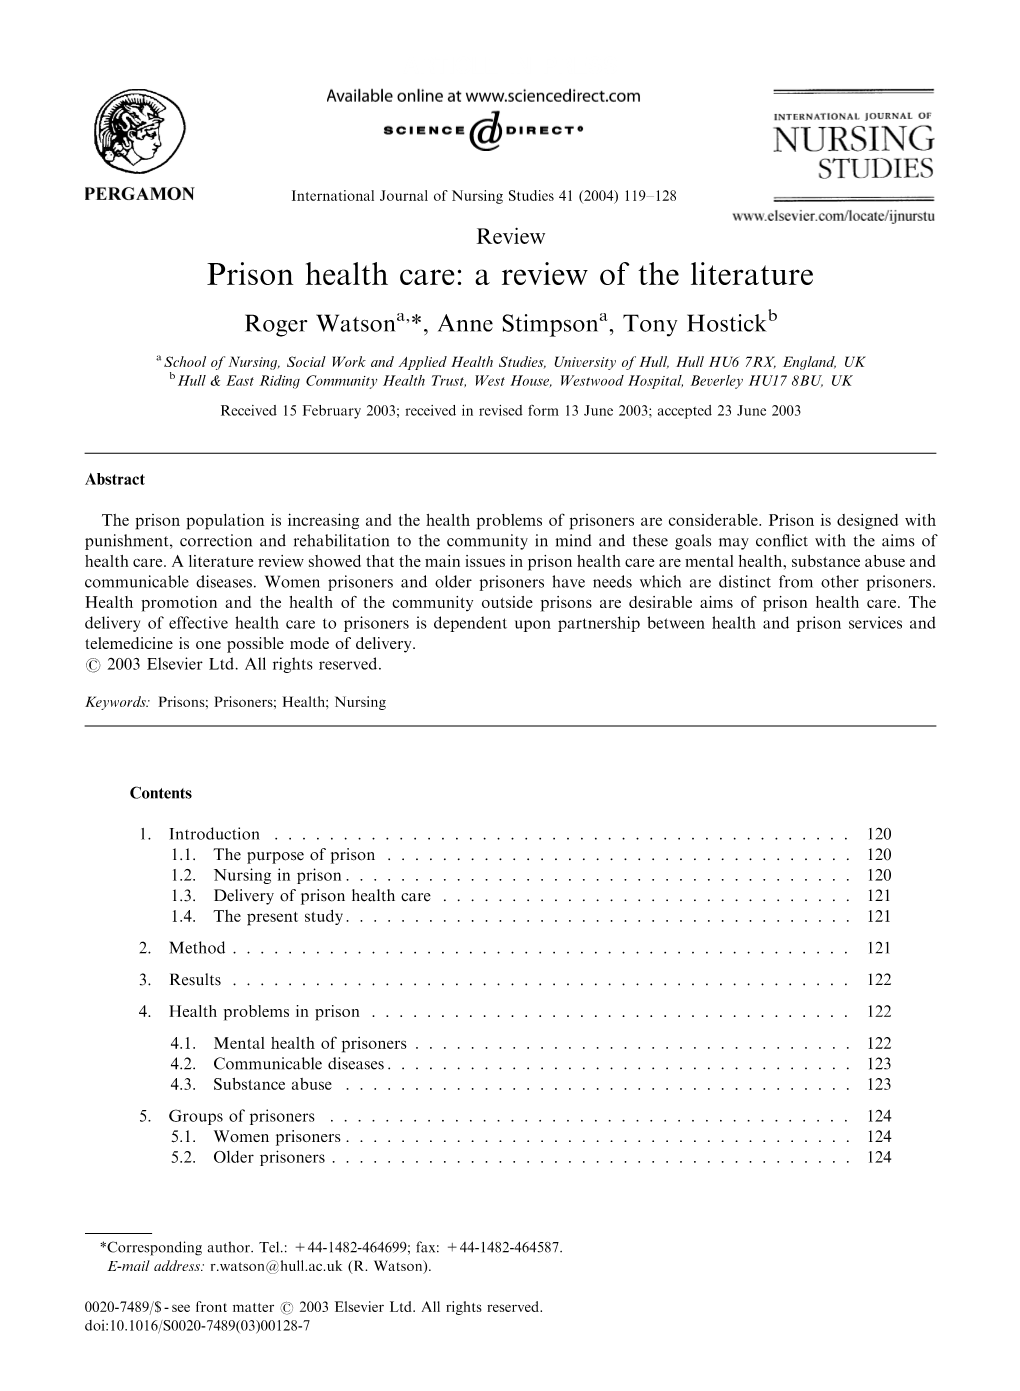 Prison Health Care: a Review of the Literature Roger Watsona,*, Anne Stimpsona, Tony Hostickb